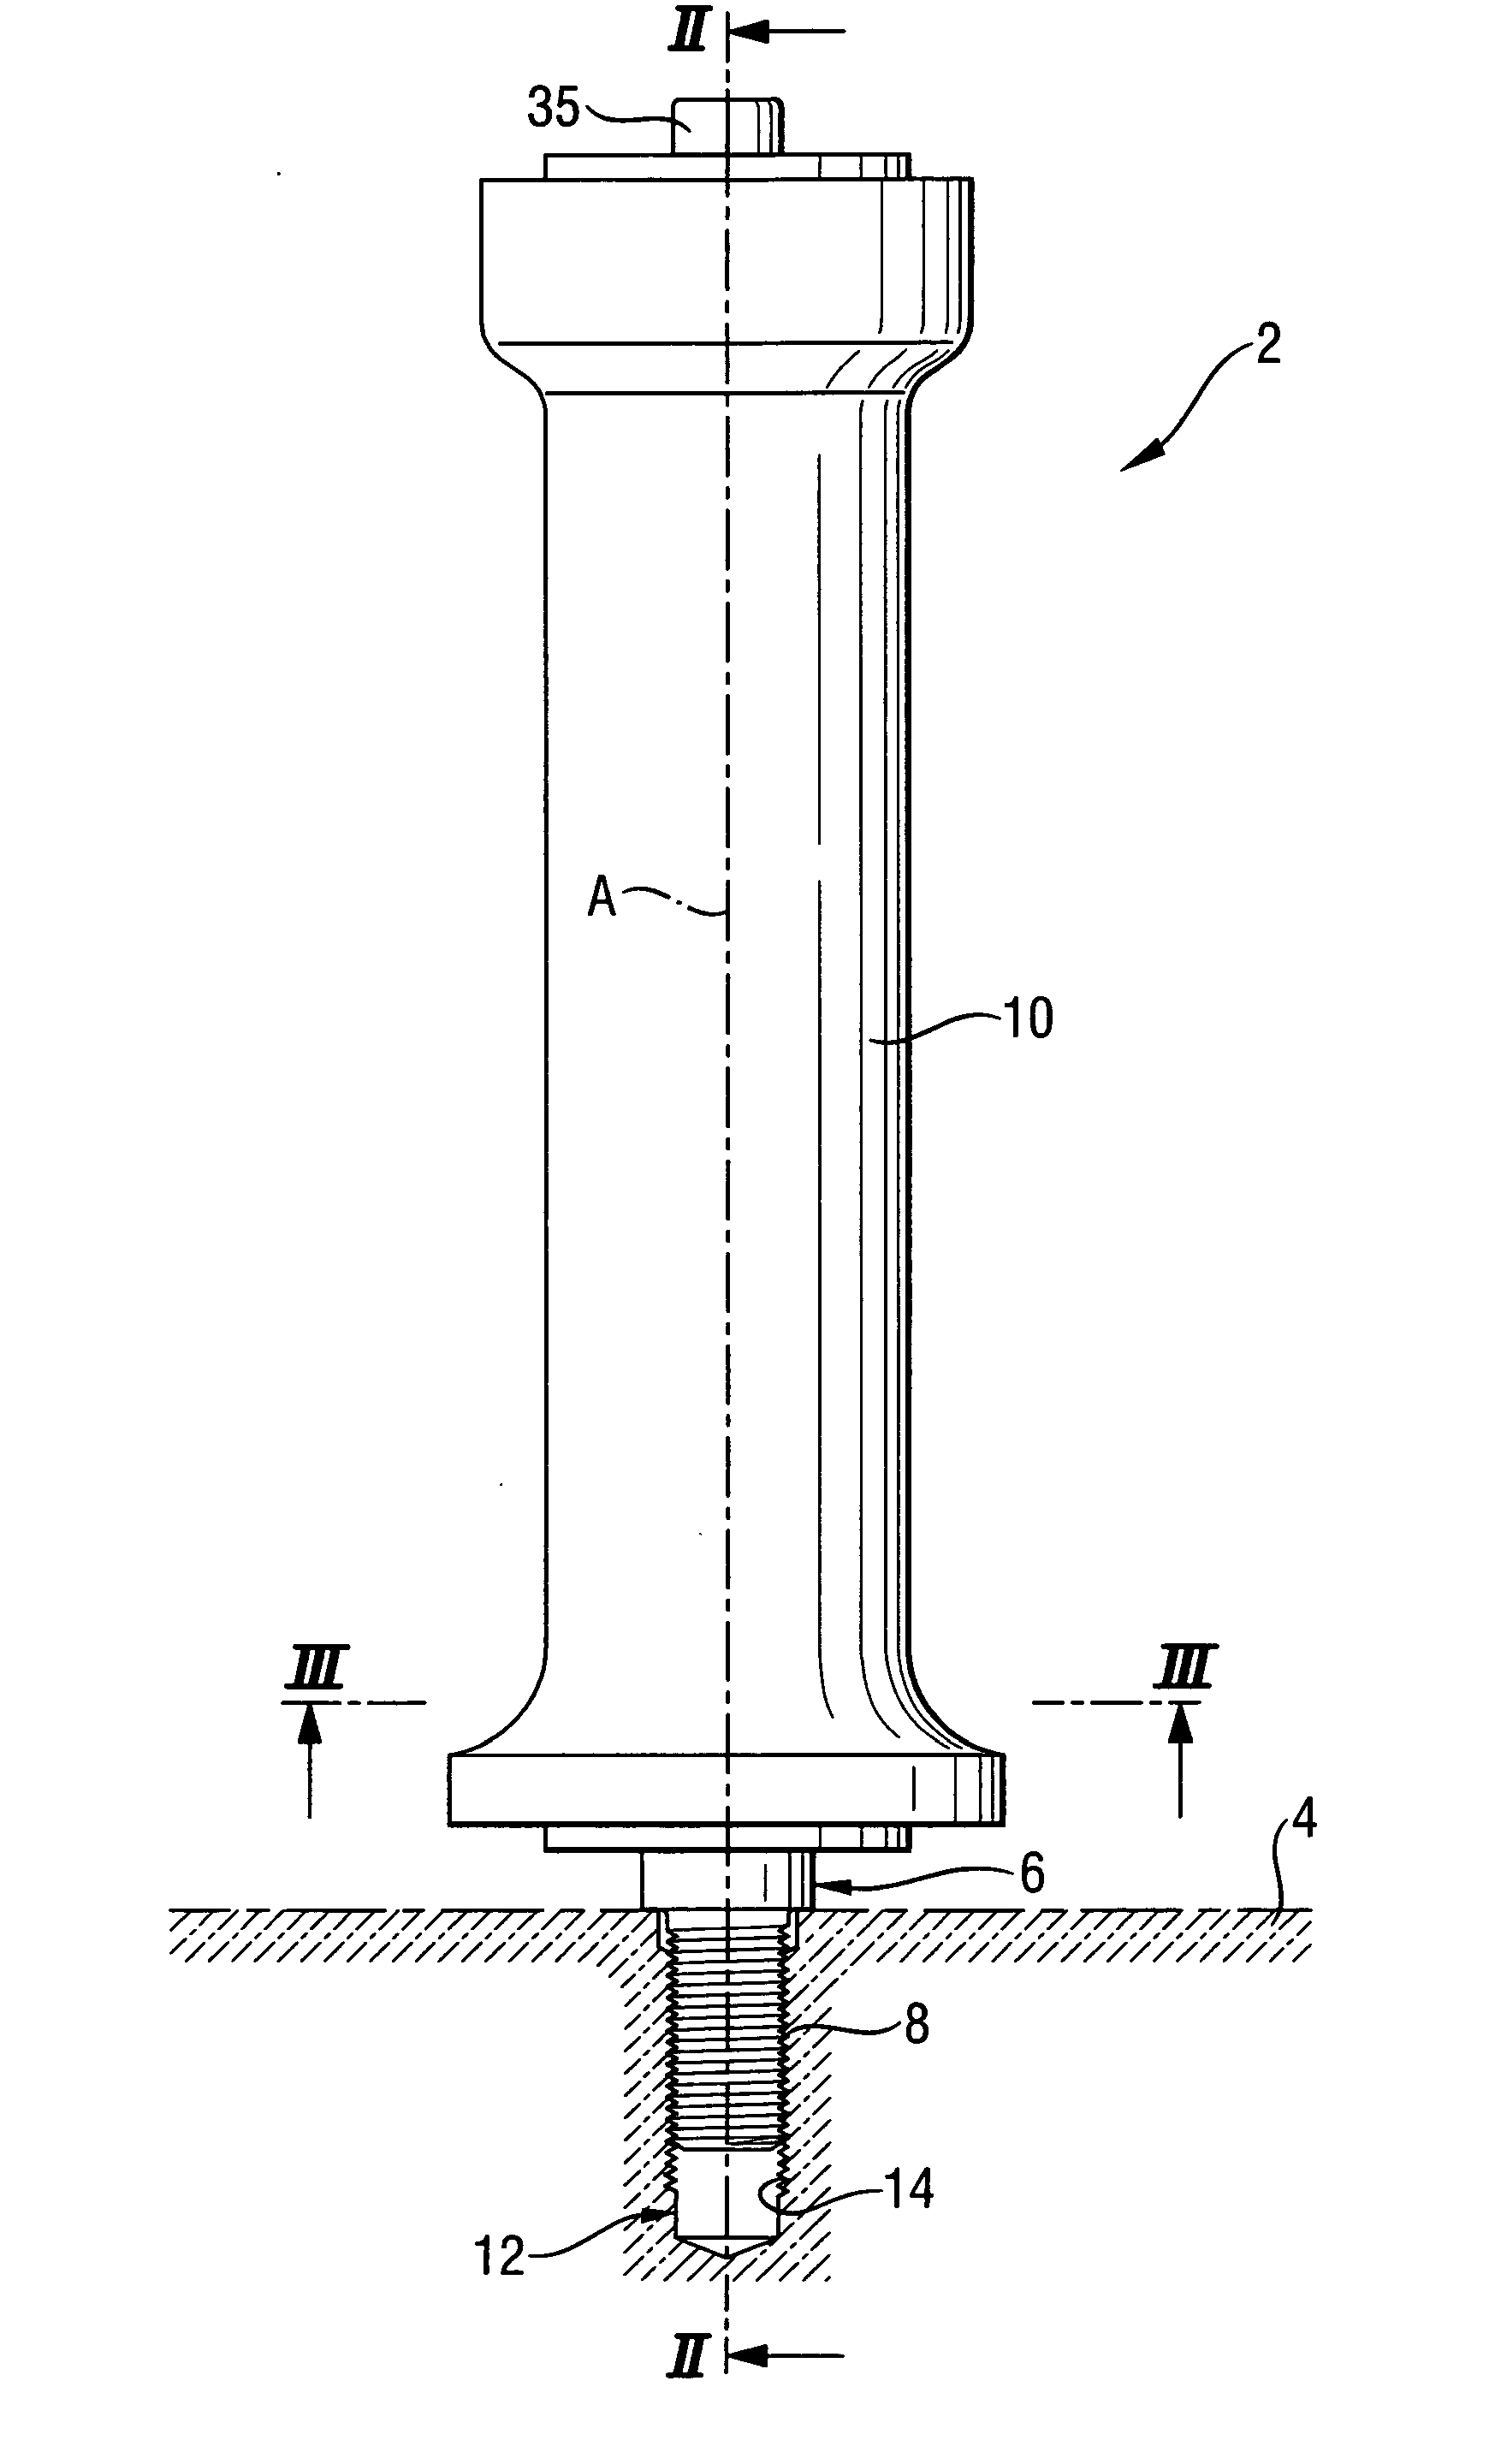 Handle with vibration-reducing device